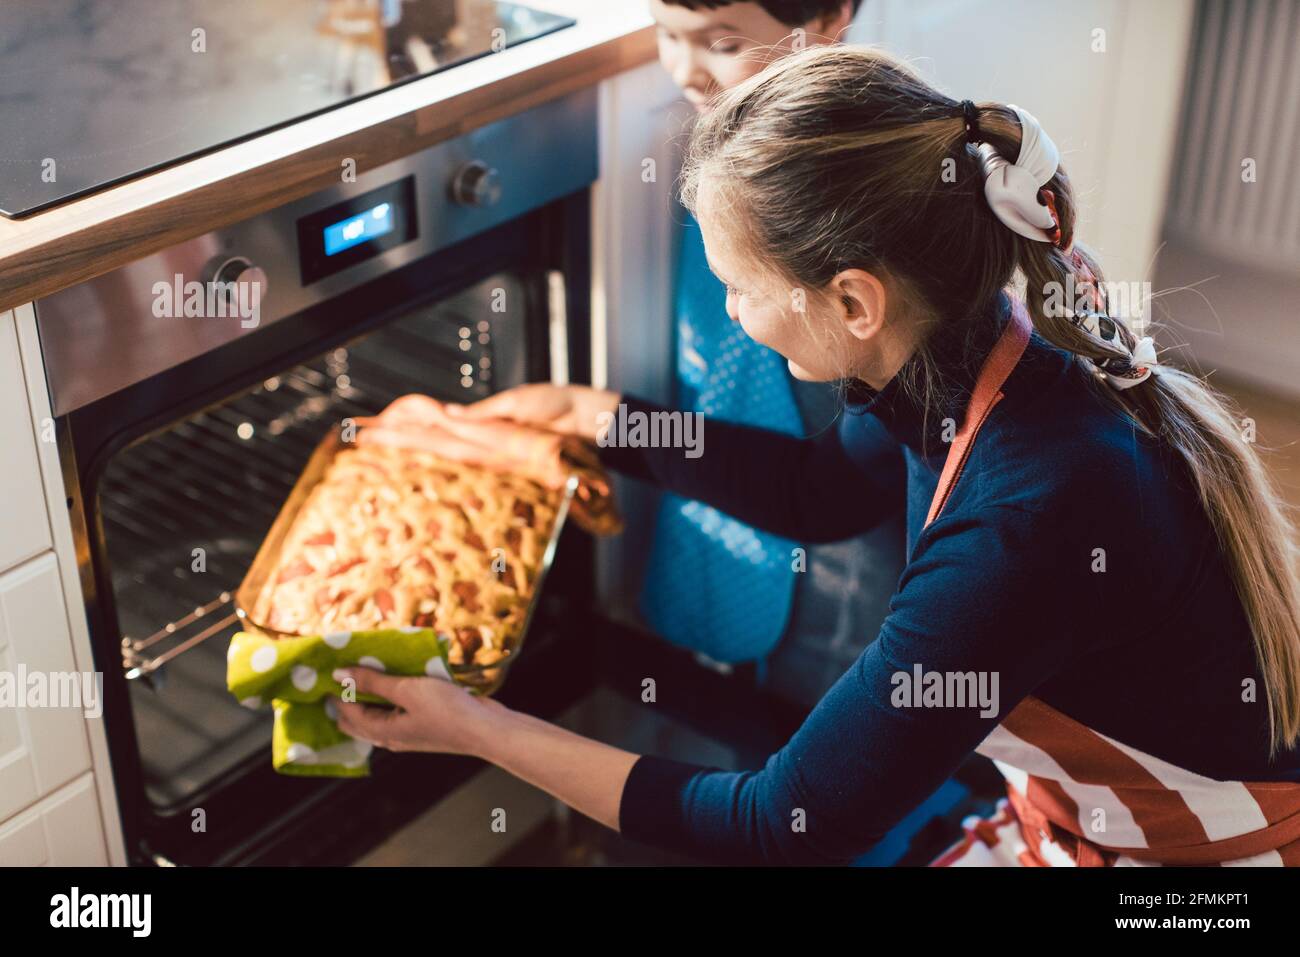 Mother and son baking pie in oven Stock Photo